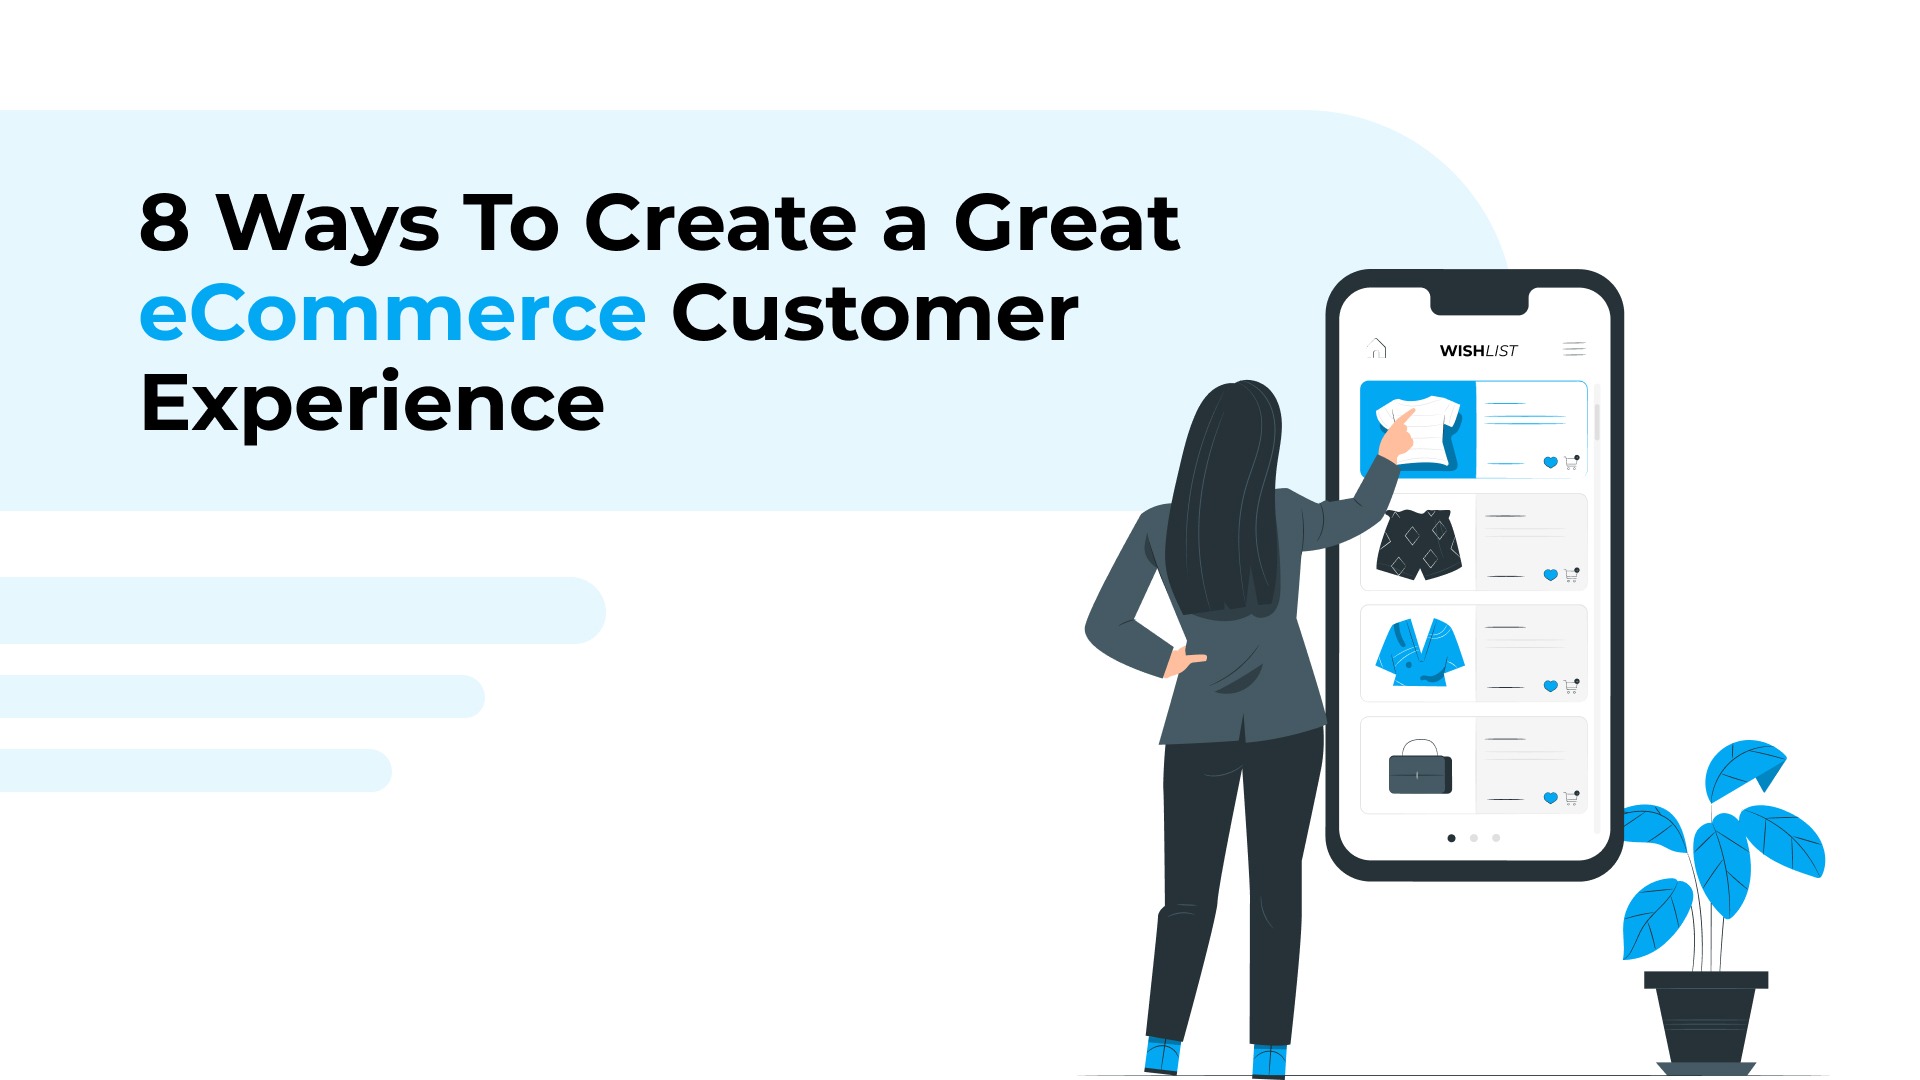 Ways To Create a Great eCommerce Customer Experience